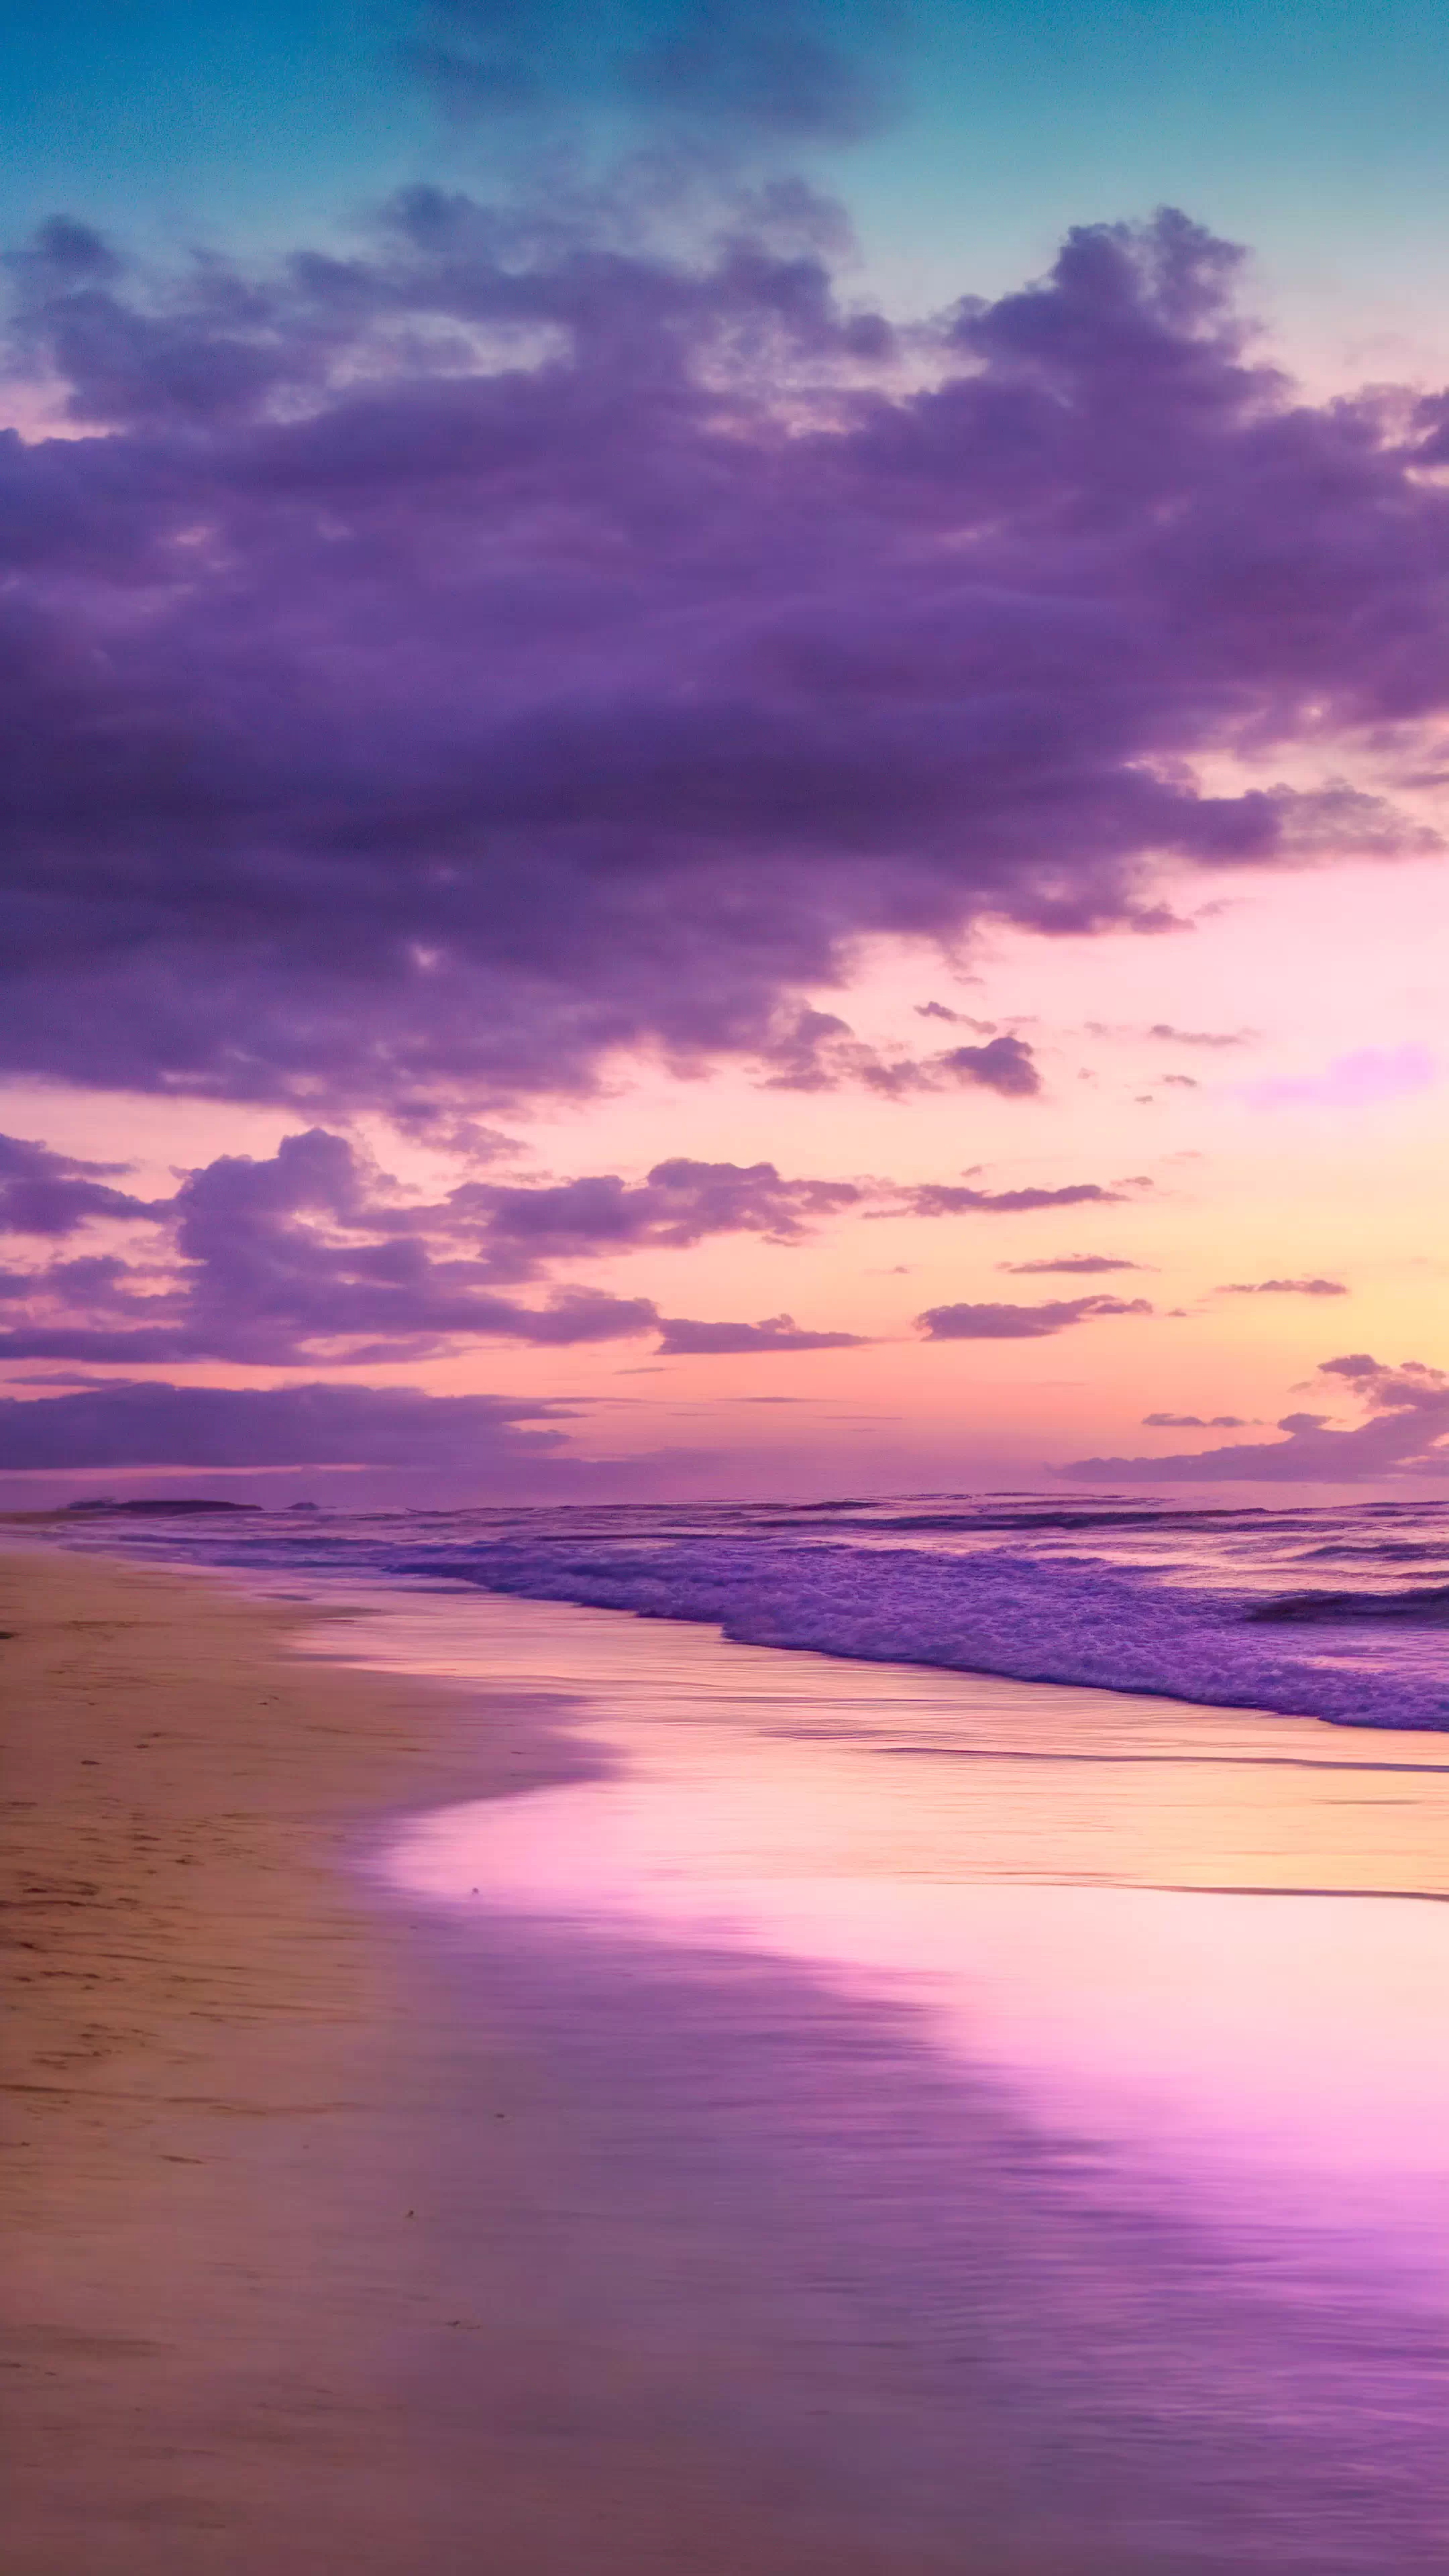 Download this nature wallpaper in HD for your iPhone, capturing a tranquil beach at twilight with a sky painted in shades of purple and pink, and let your screen become a window to a serene coastal sunset.